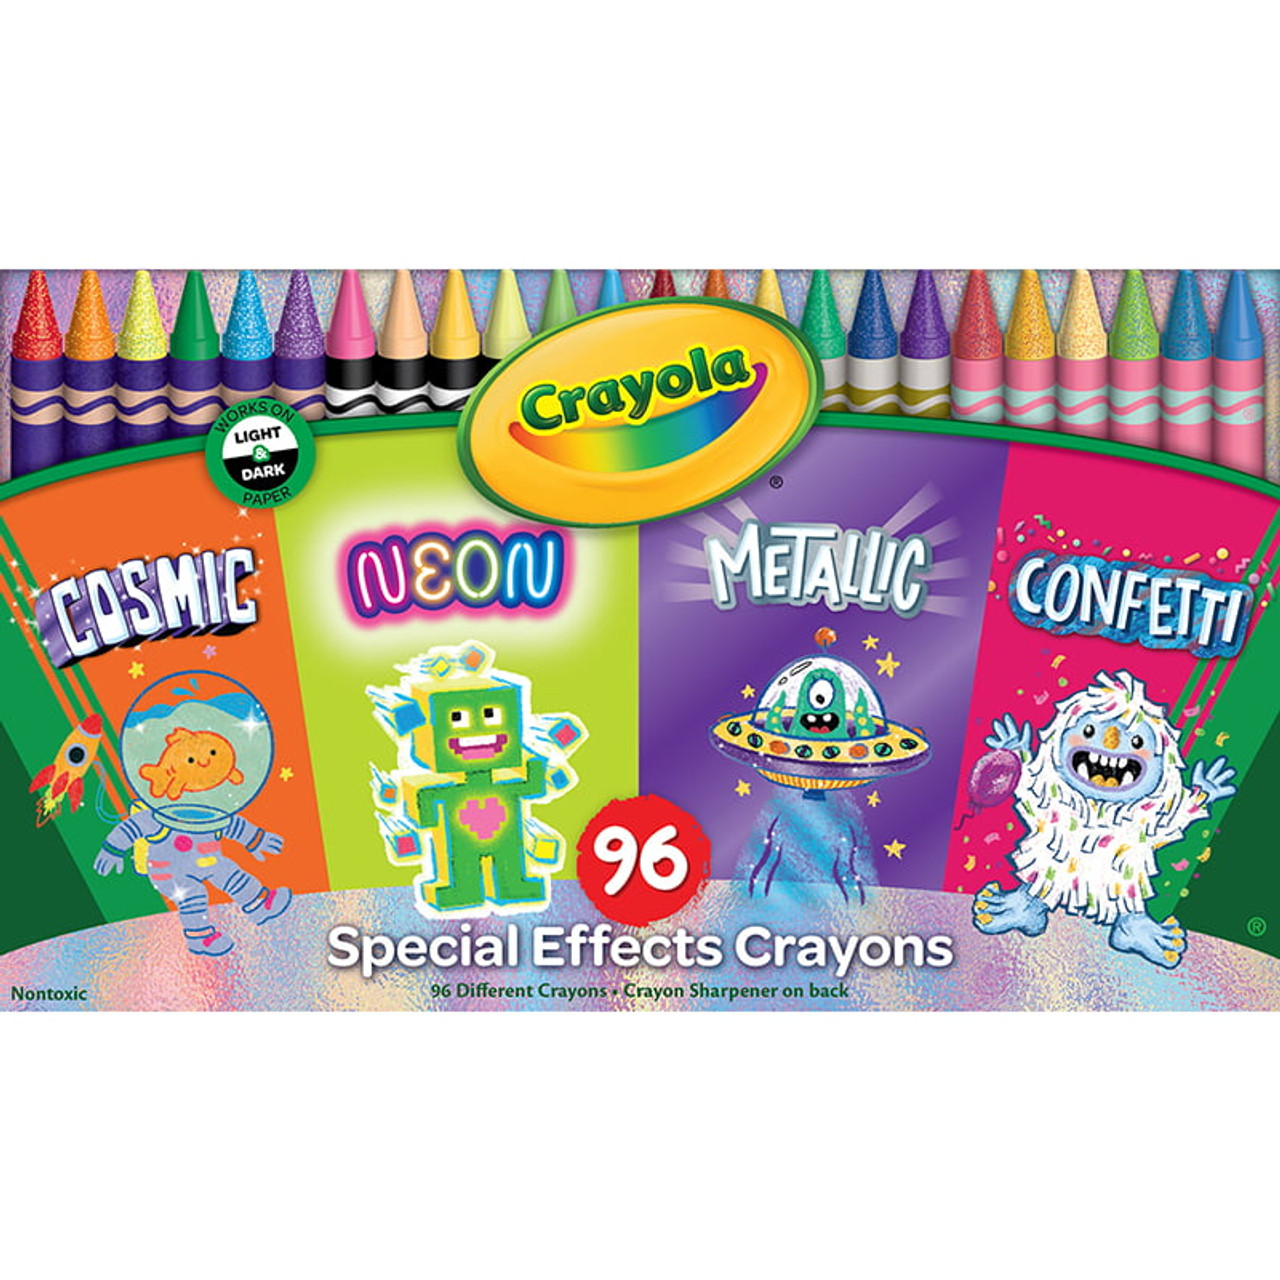 120 Specialty Crayola Crayons: Pearl, Glitter, Metallic, Neon and